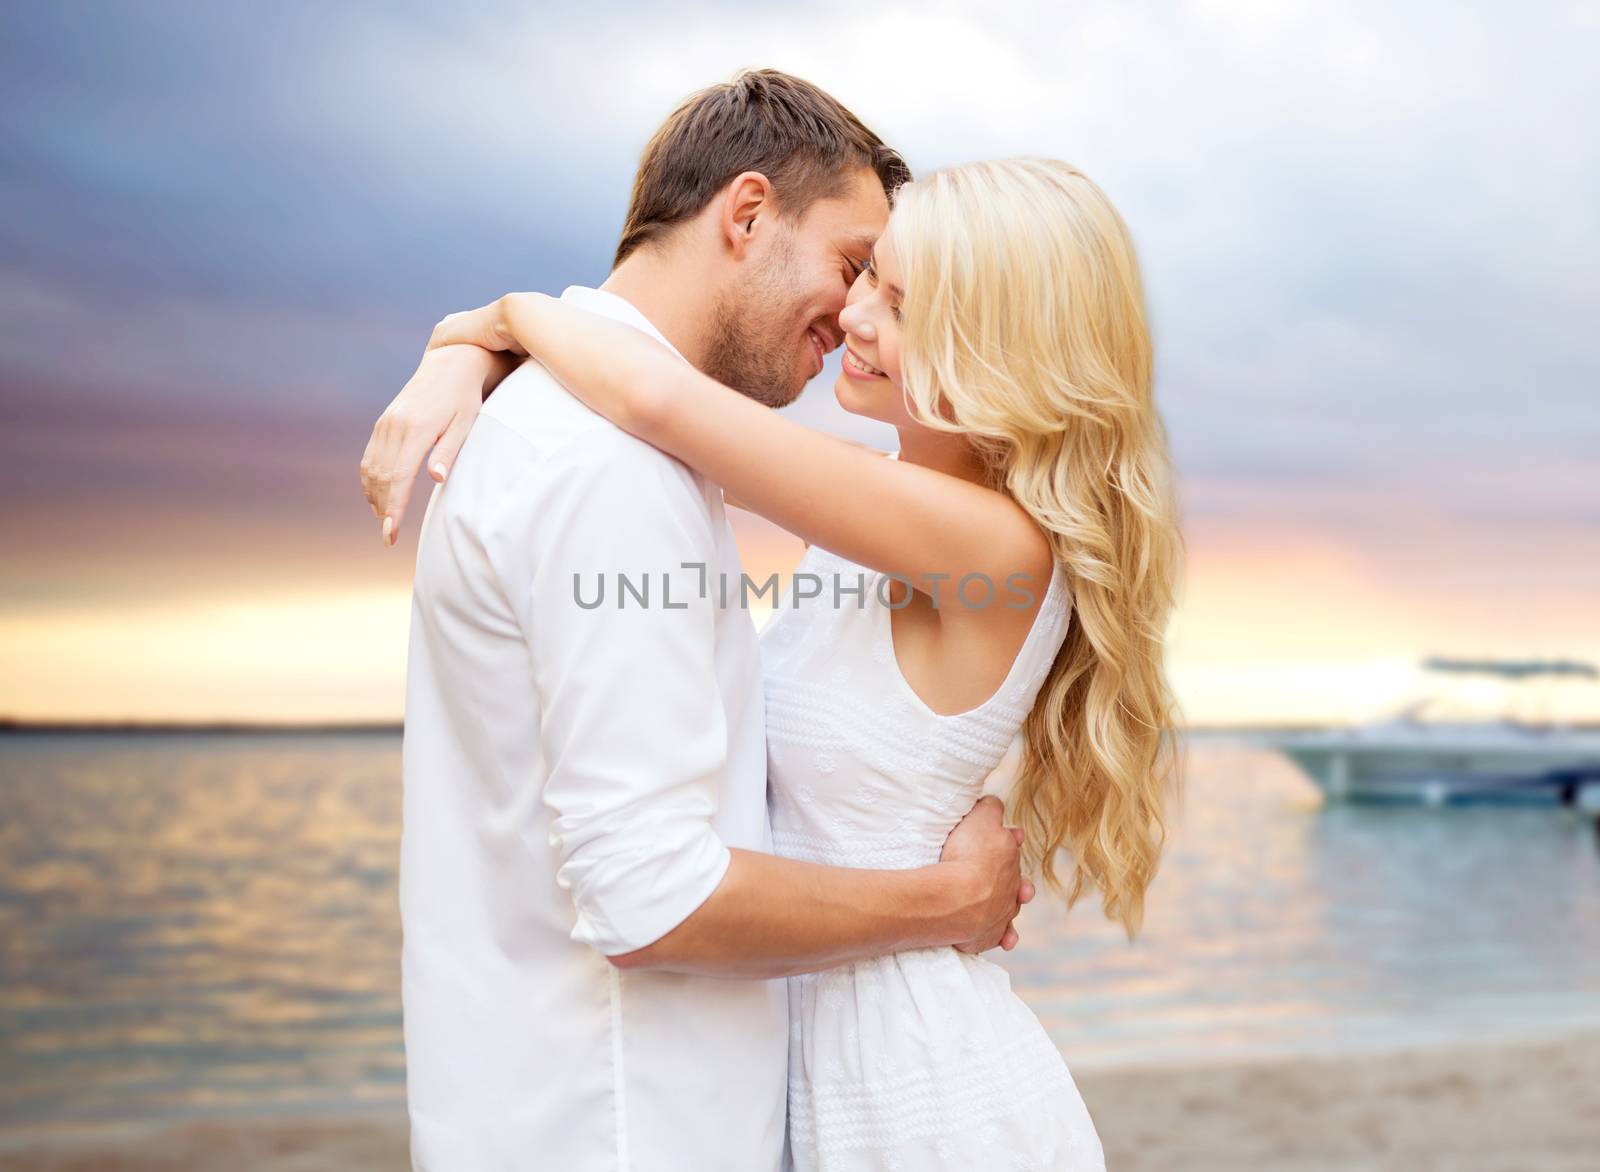 summer holidays, people, love and dating concept - happy couple hugging over sunset at summer beach background